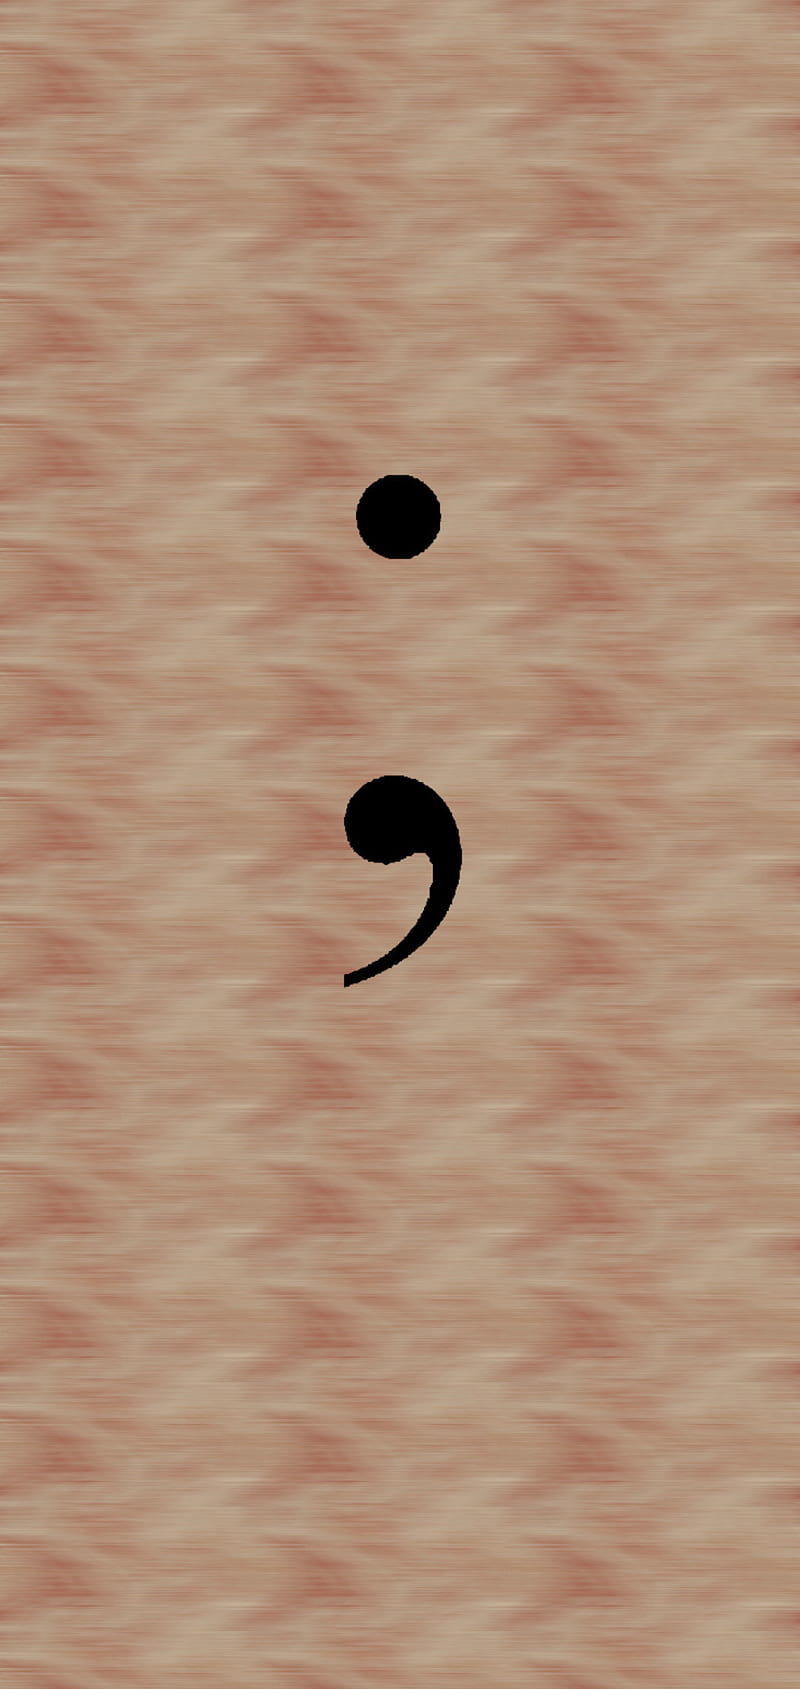 Share more than 85 semicolon wallpaper best - in.cdgdbentre